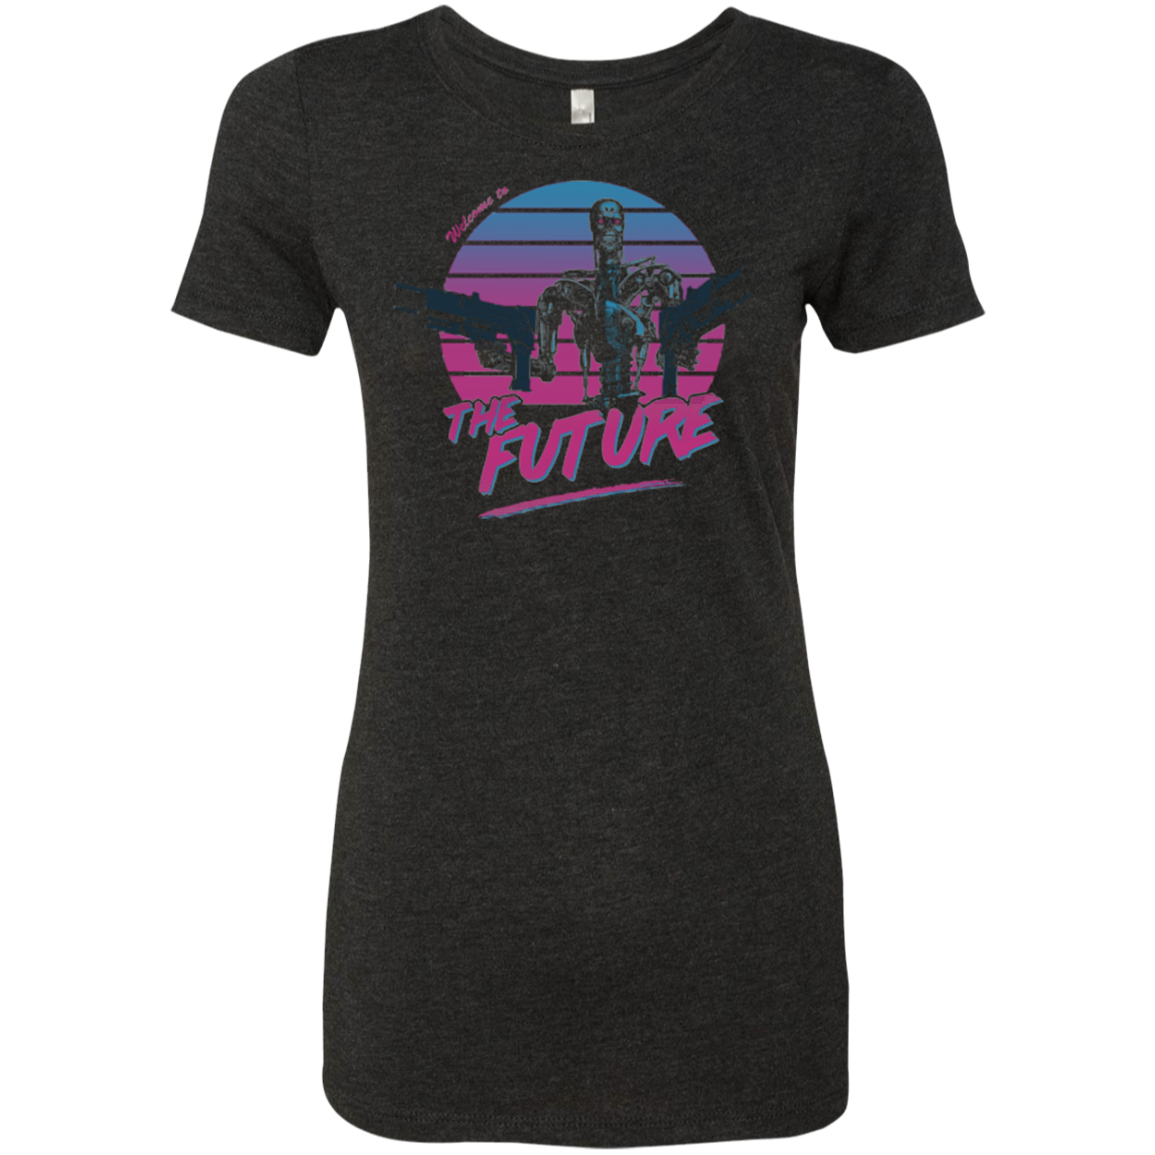 Welcome to the Future Women's Triblend T-Shirt